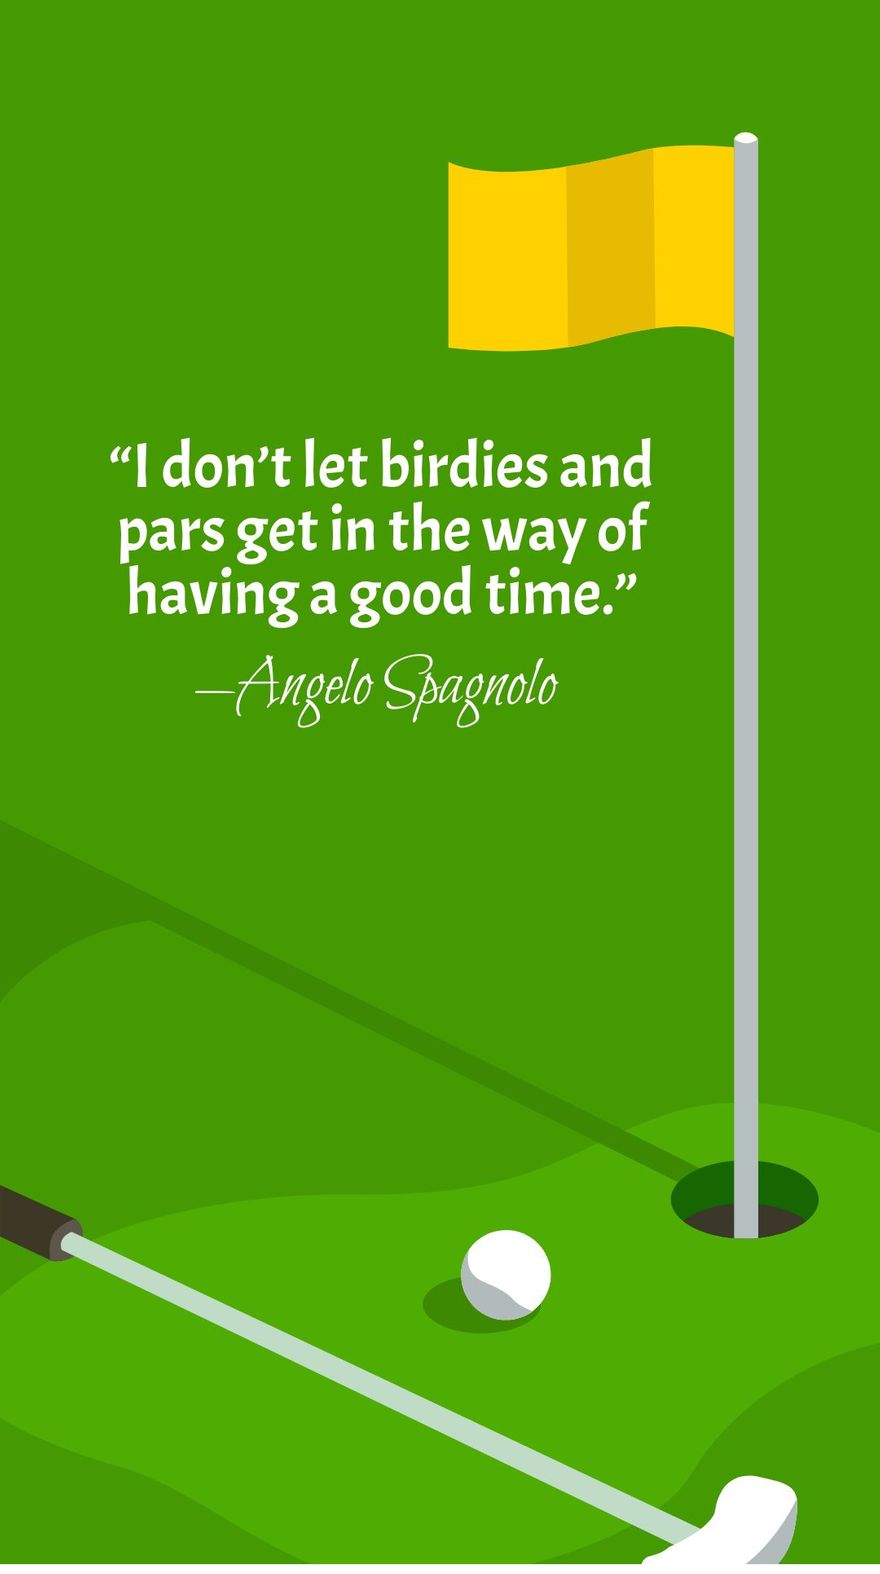 Angelo Spagnolo - I don’t let birdies and pars get in the way of having a good time.